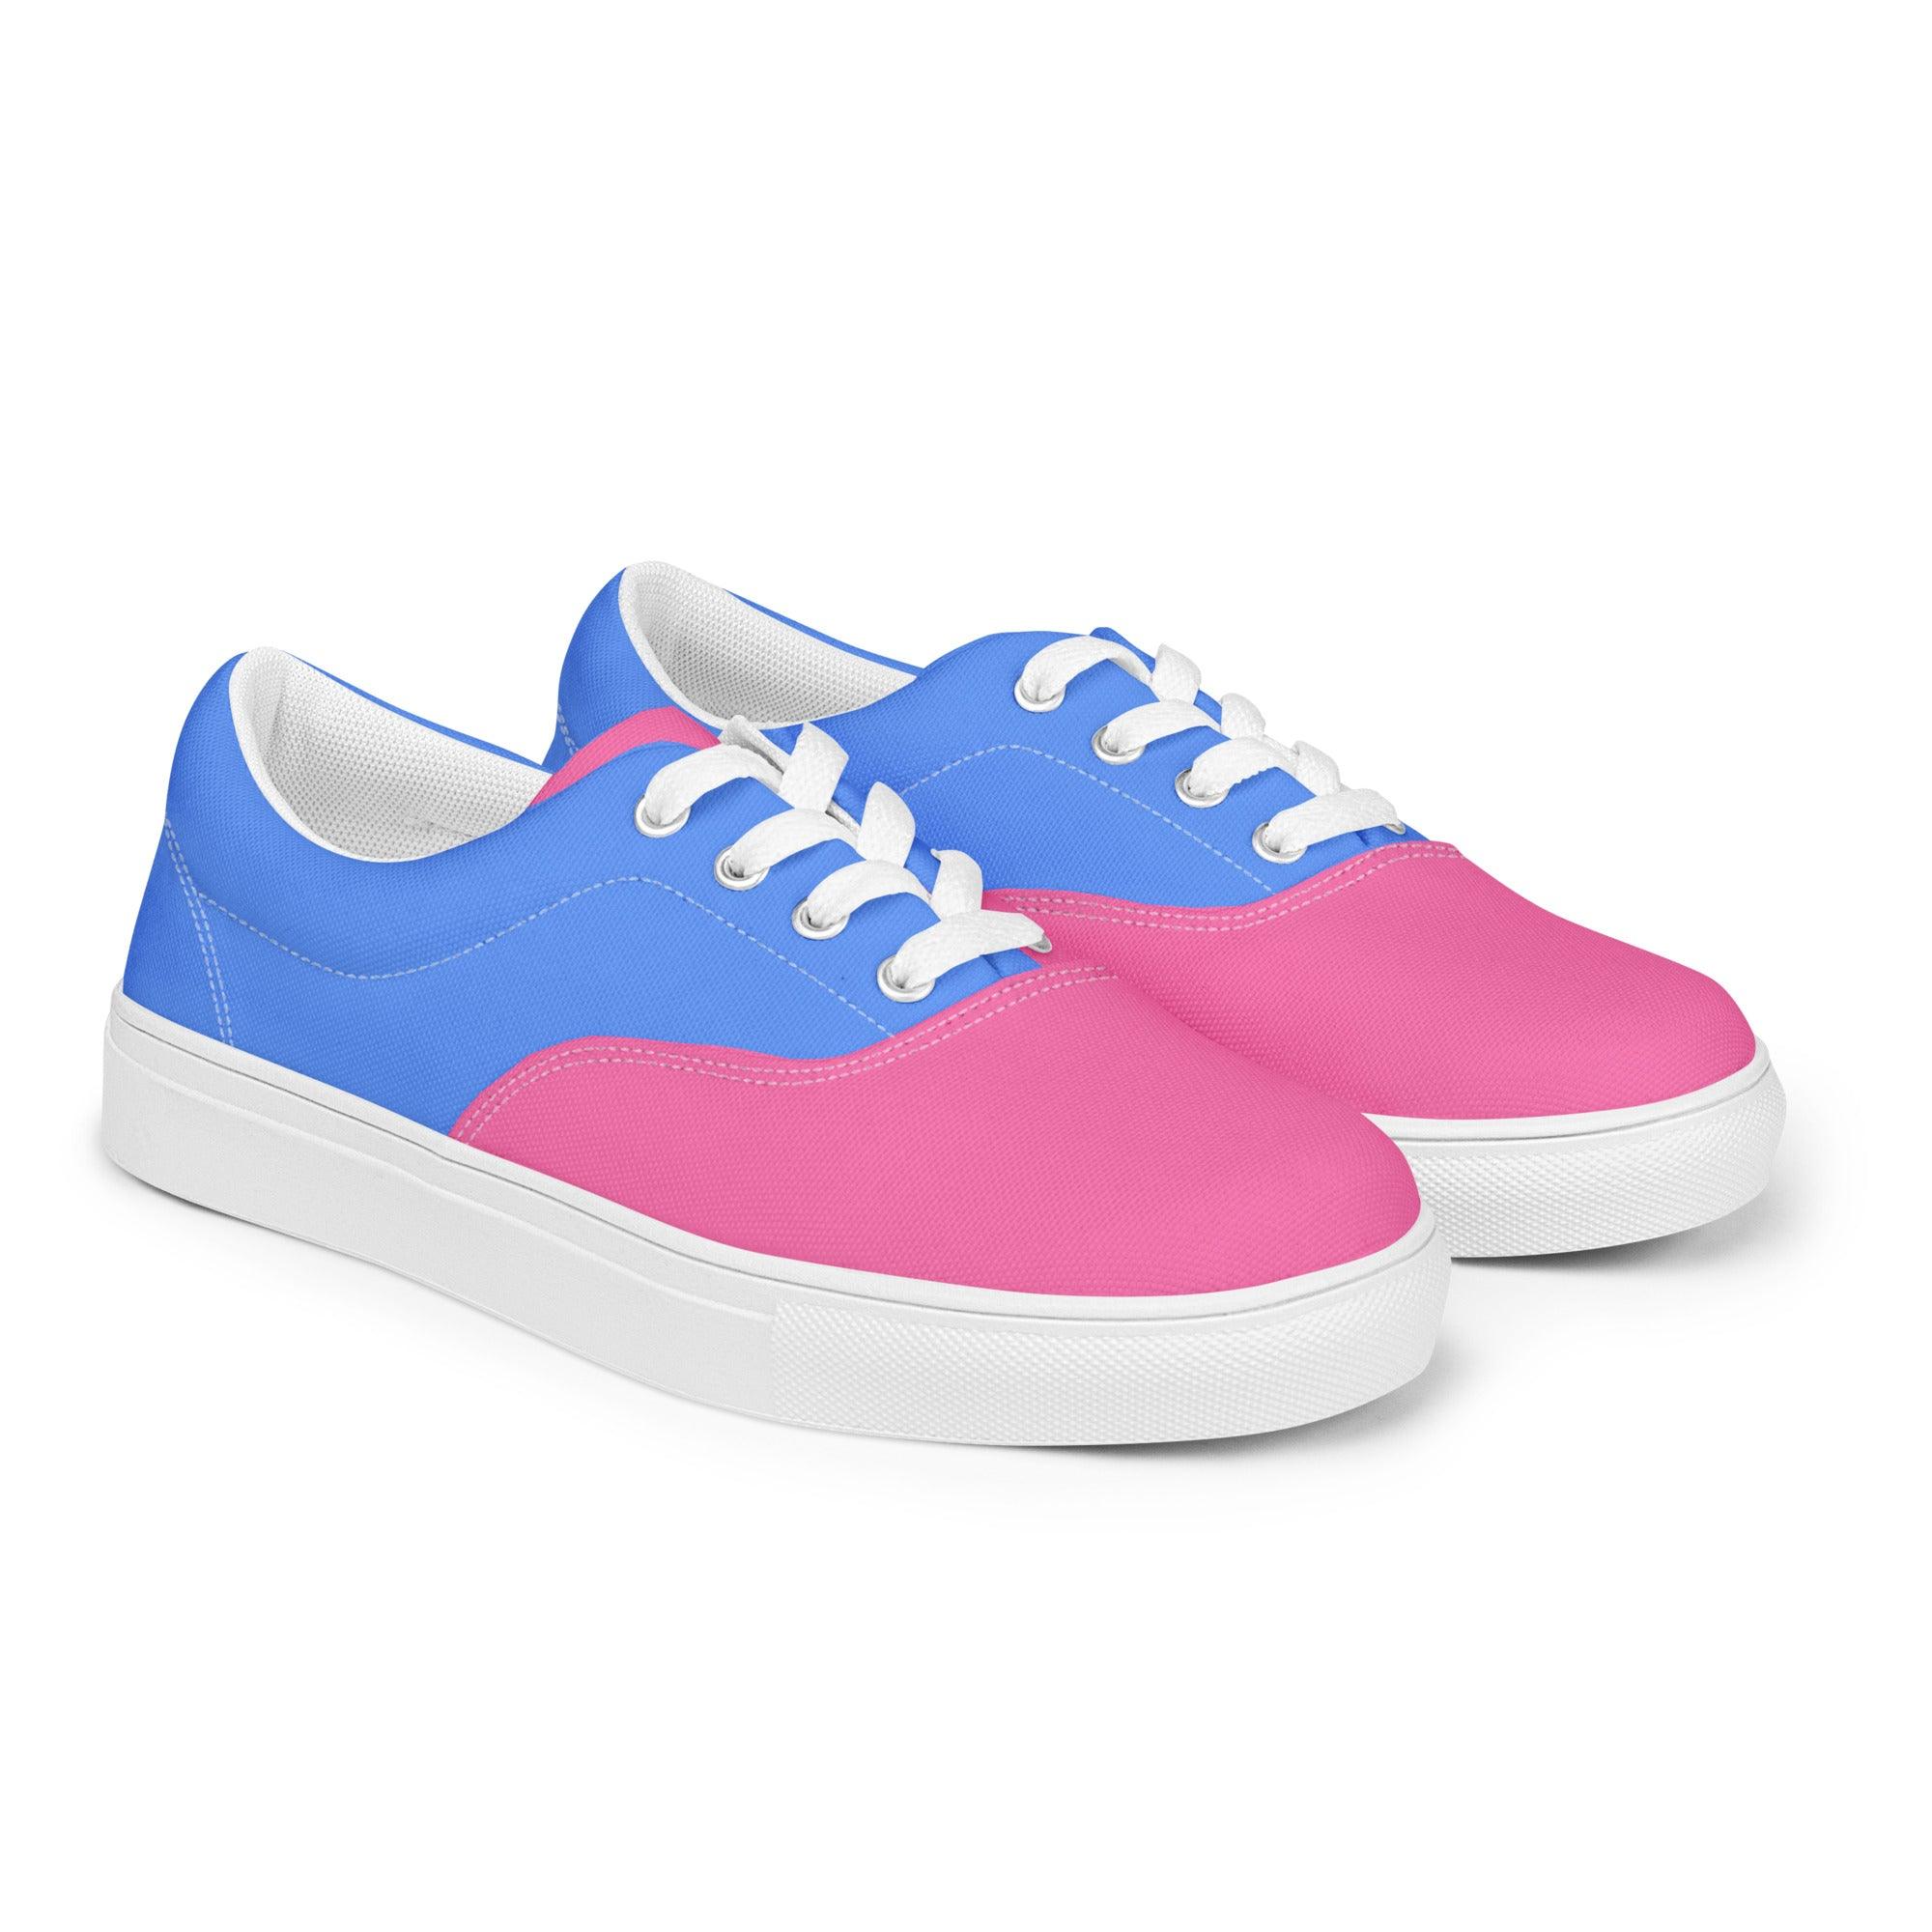 Sechia Color Block Lace Up Canvas Sneakers - Blissfully Brand